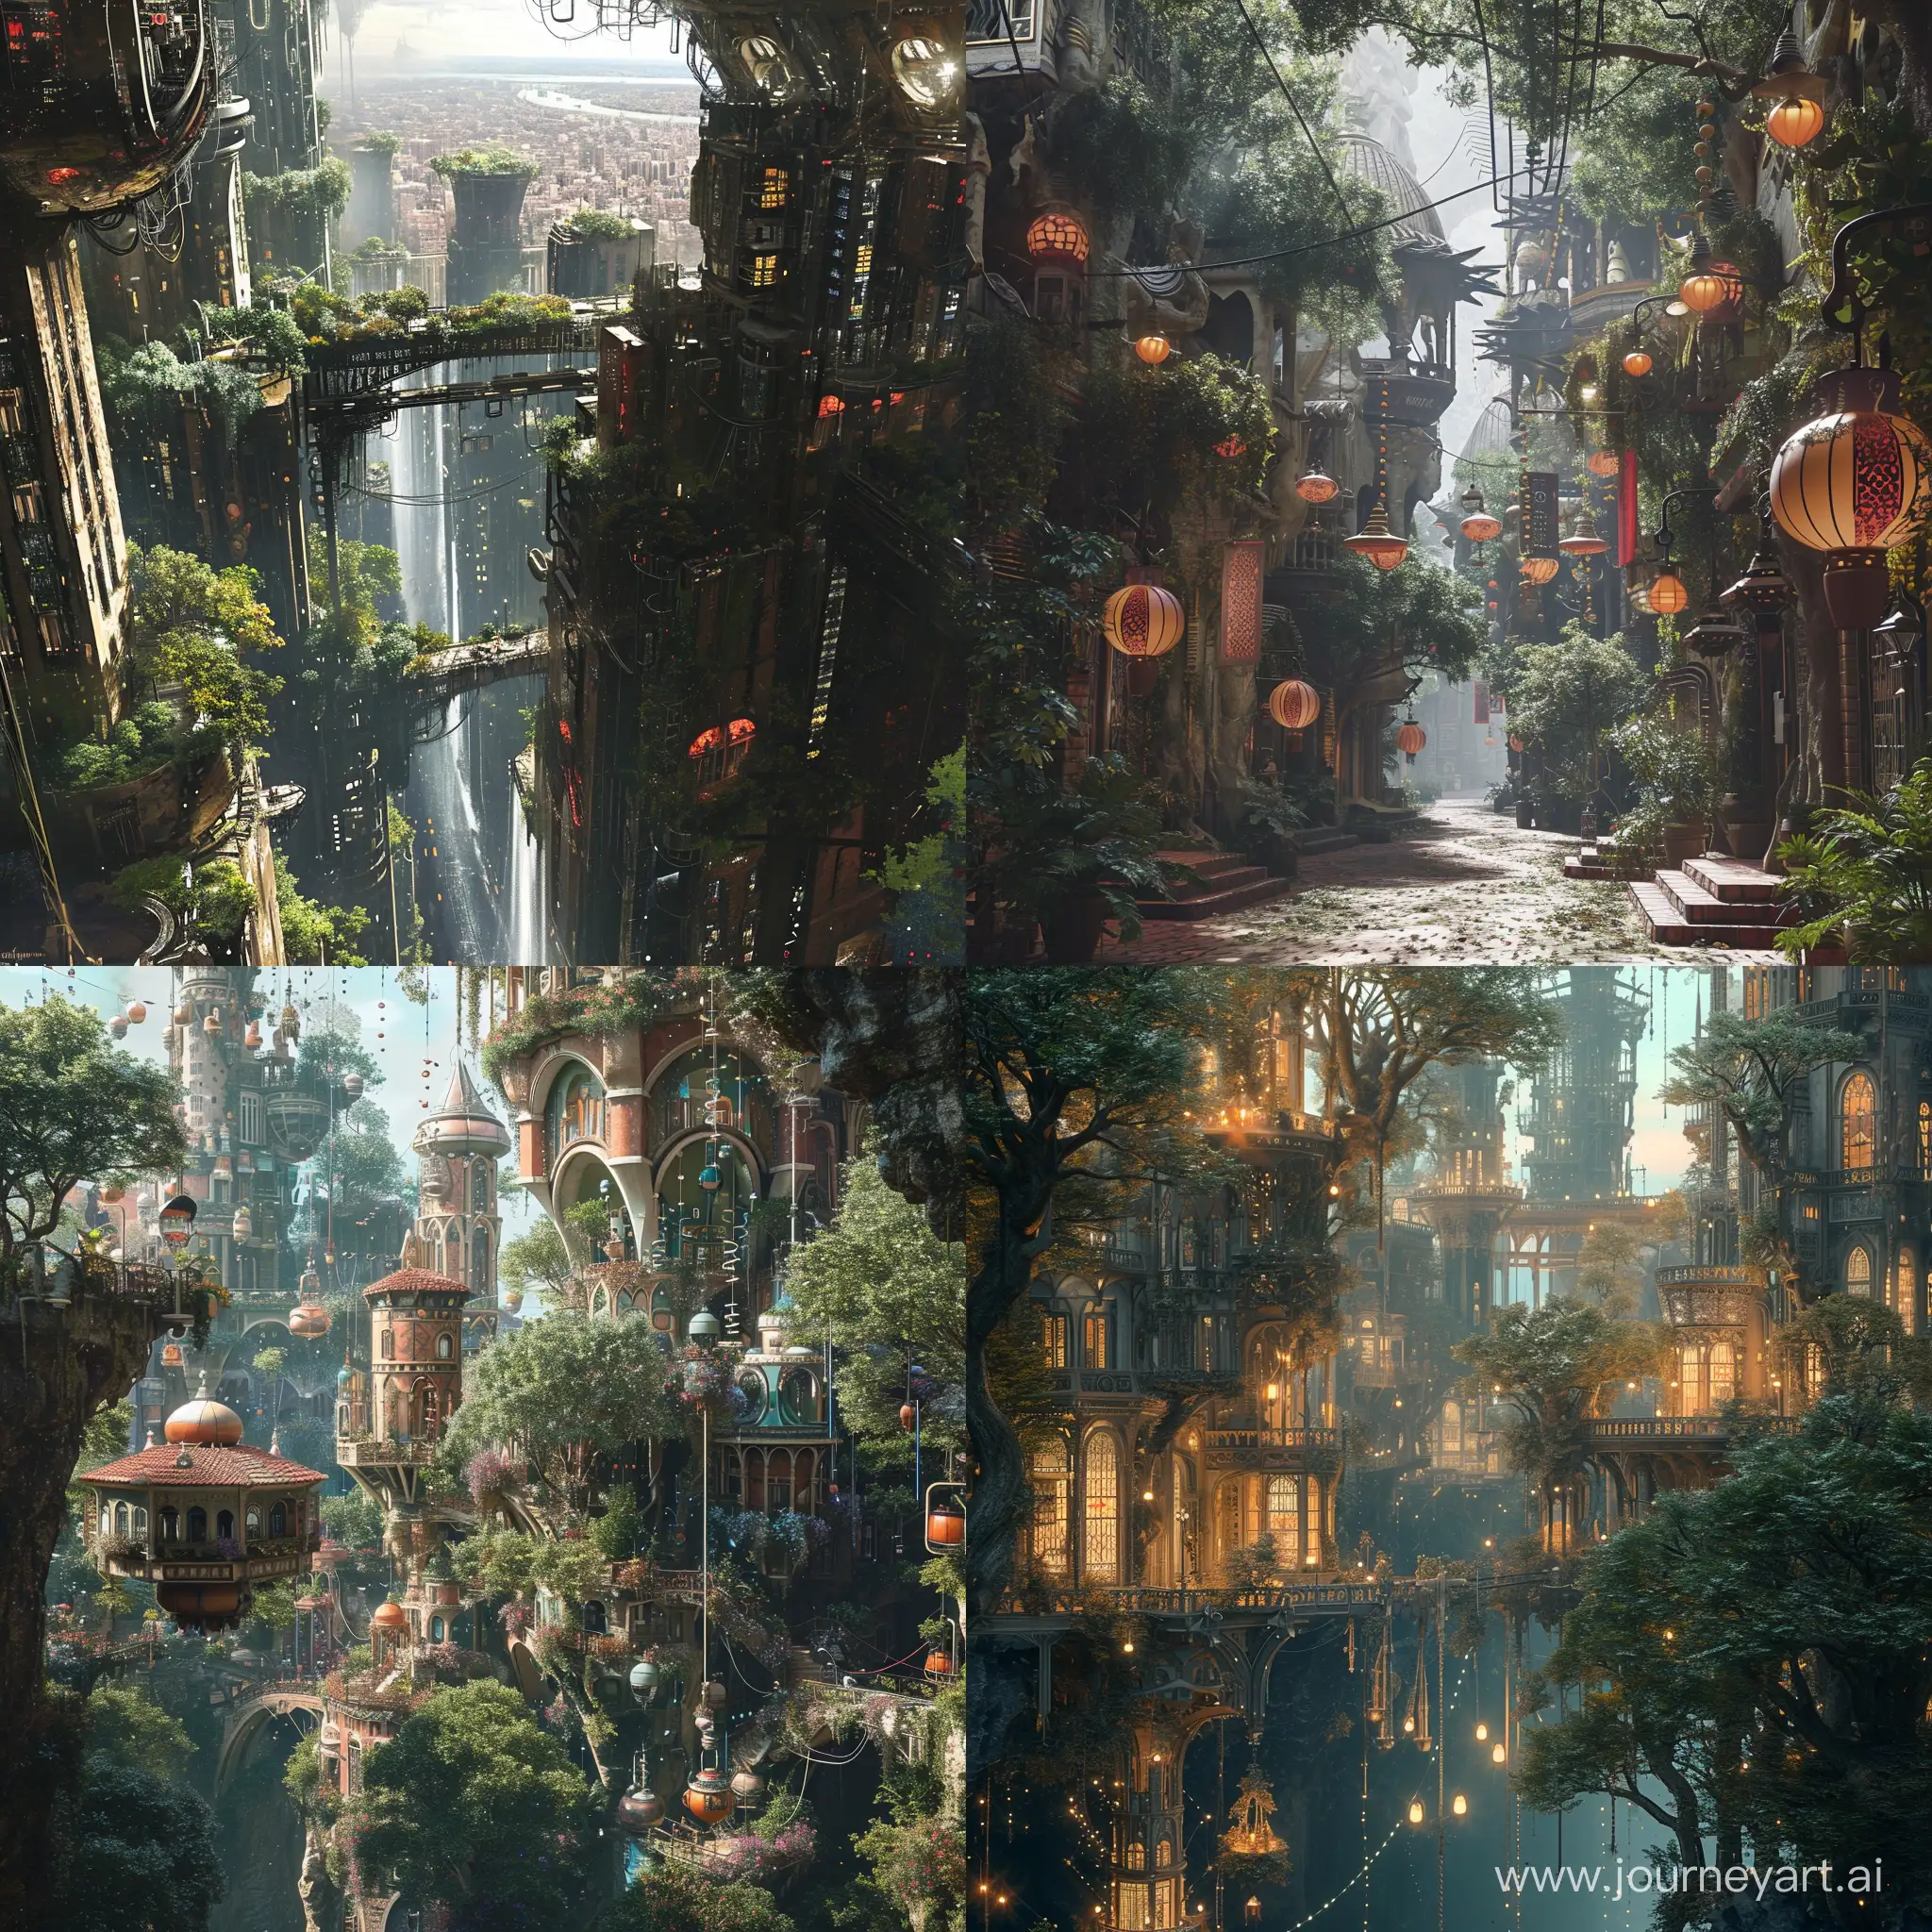 Photo, modern::1.3. depicts a fantastical cityscape with a river running through the middle. The buildings are covered in plants and there are many hanging objects such as lanterns and signs. The city is surrounded by trees and the sky is blue. Realism::1.3, V-ray. --v 6